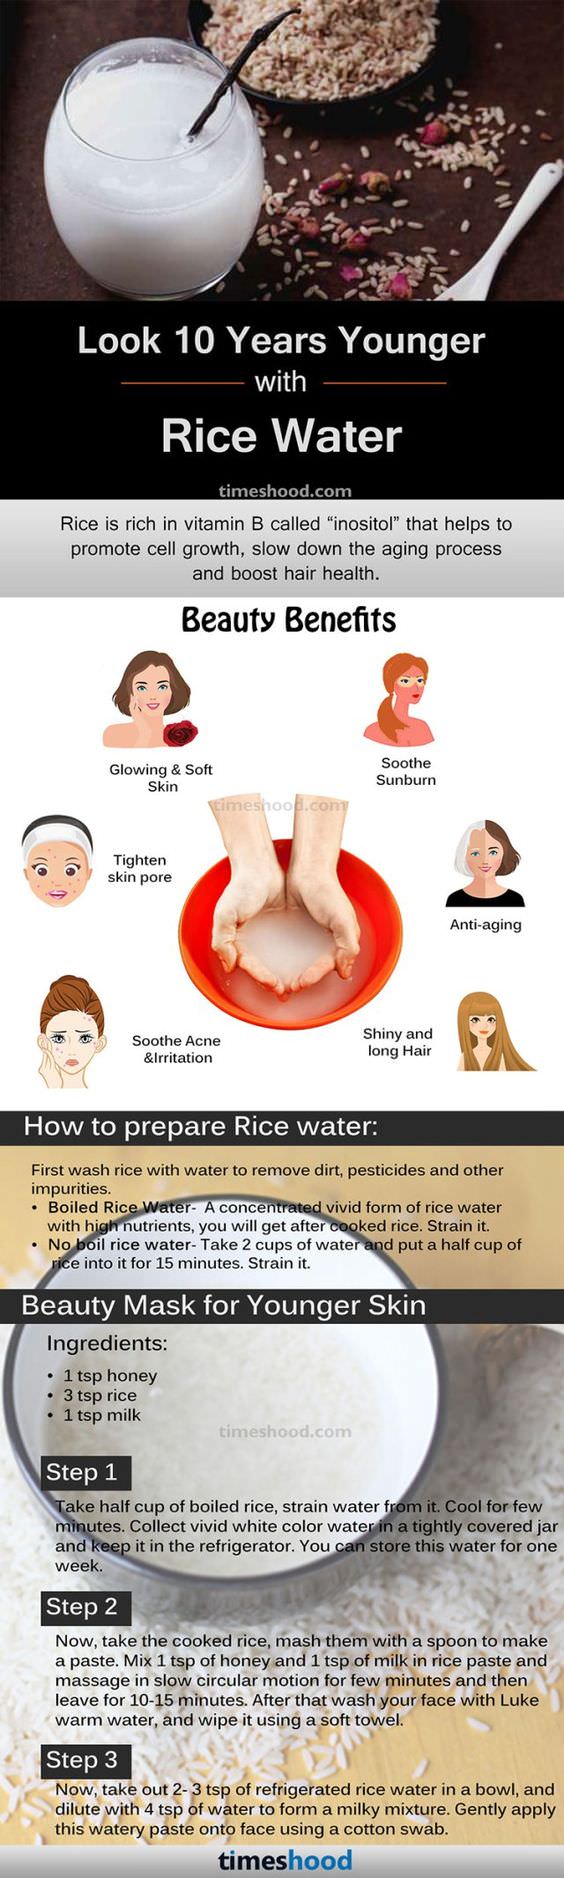 Rice Water Mask that will give the radiant youthful skin to look 10 years younger. Benefits and How to prepare Rice water for skin and hair with steps.